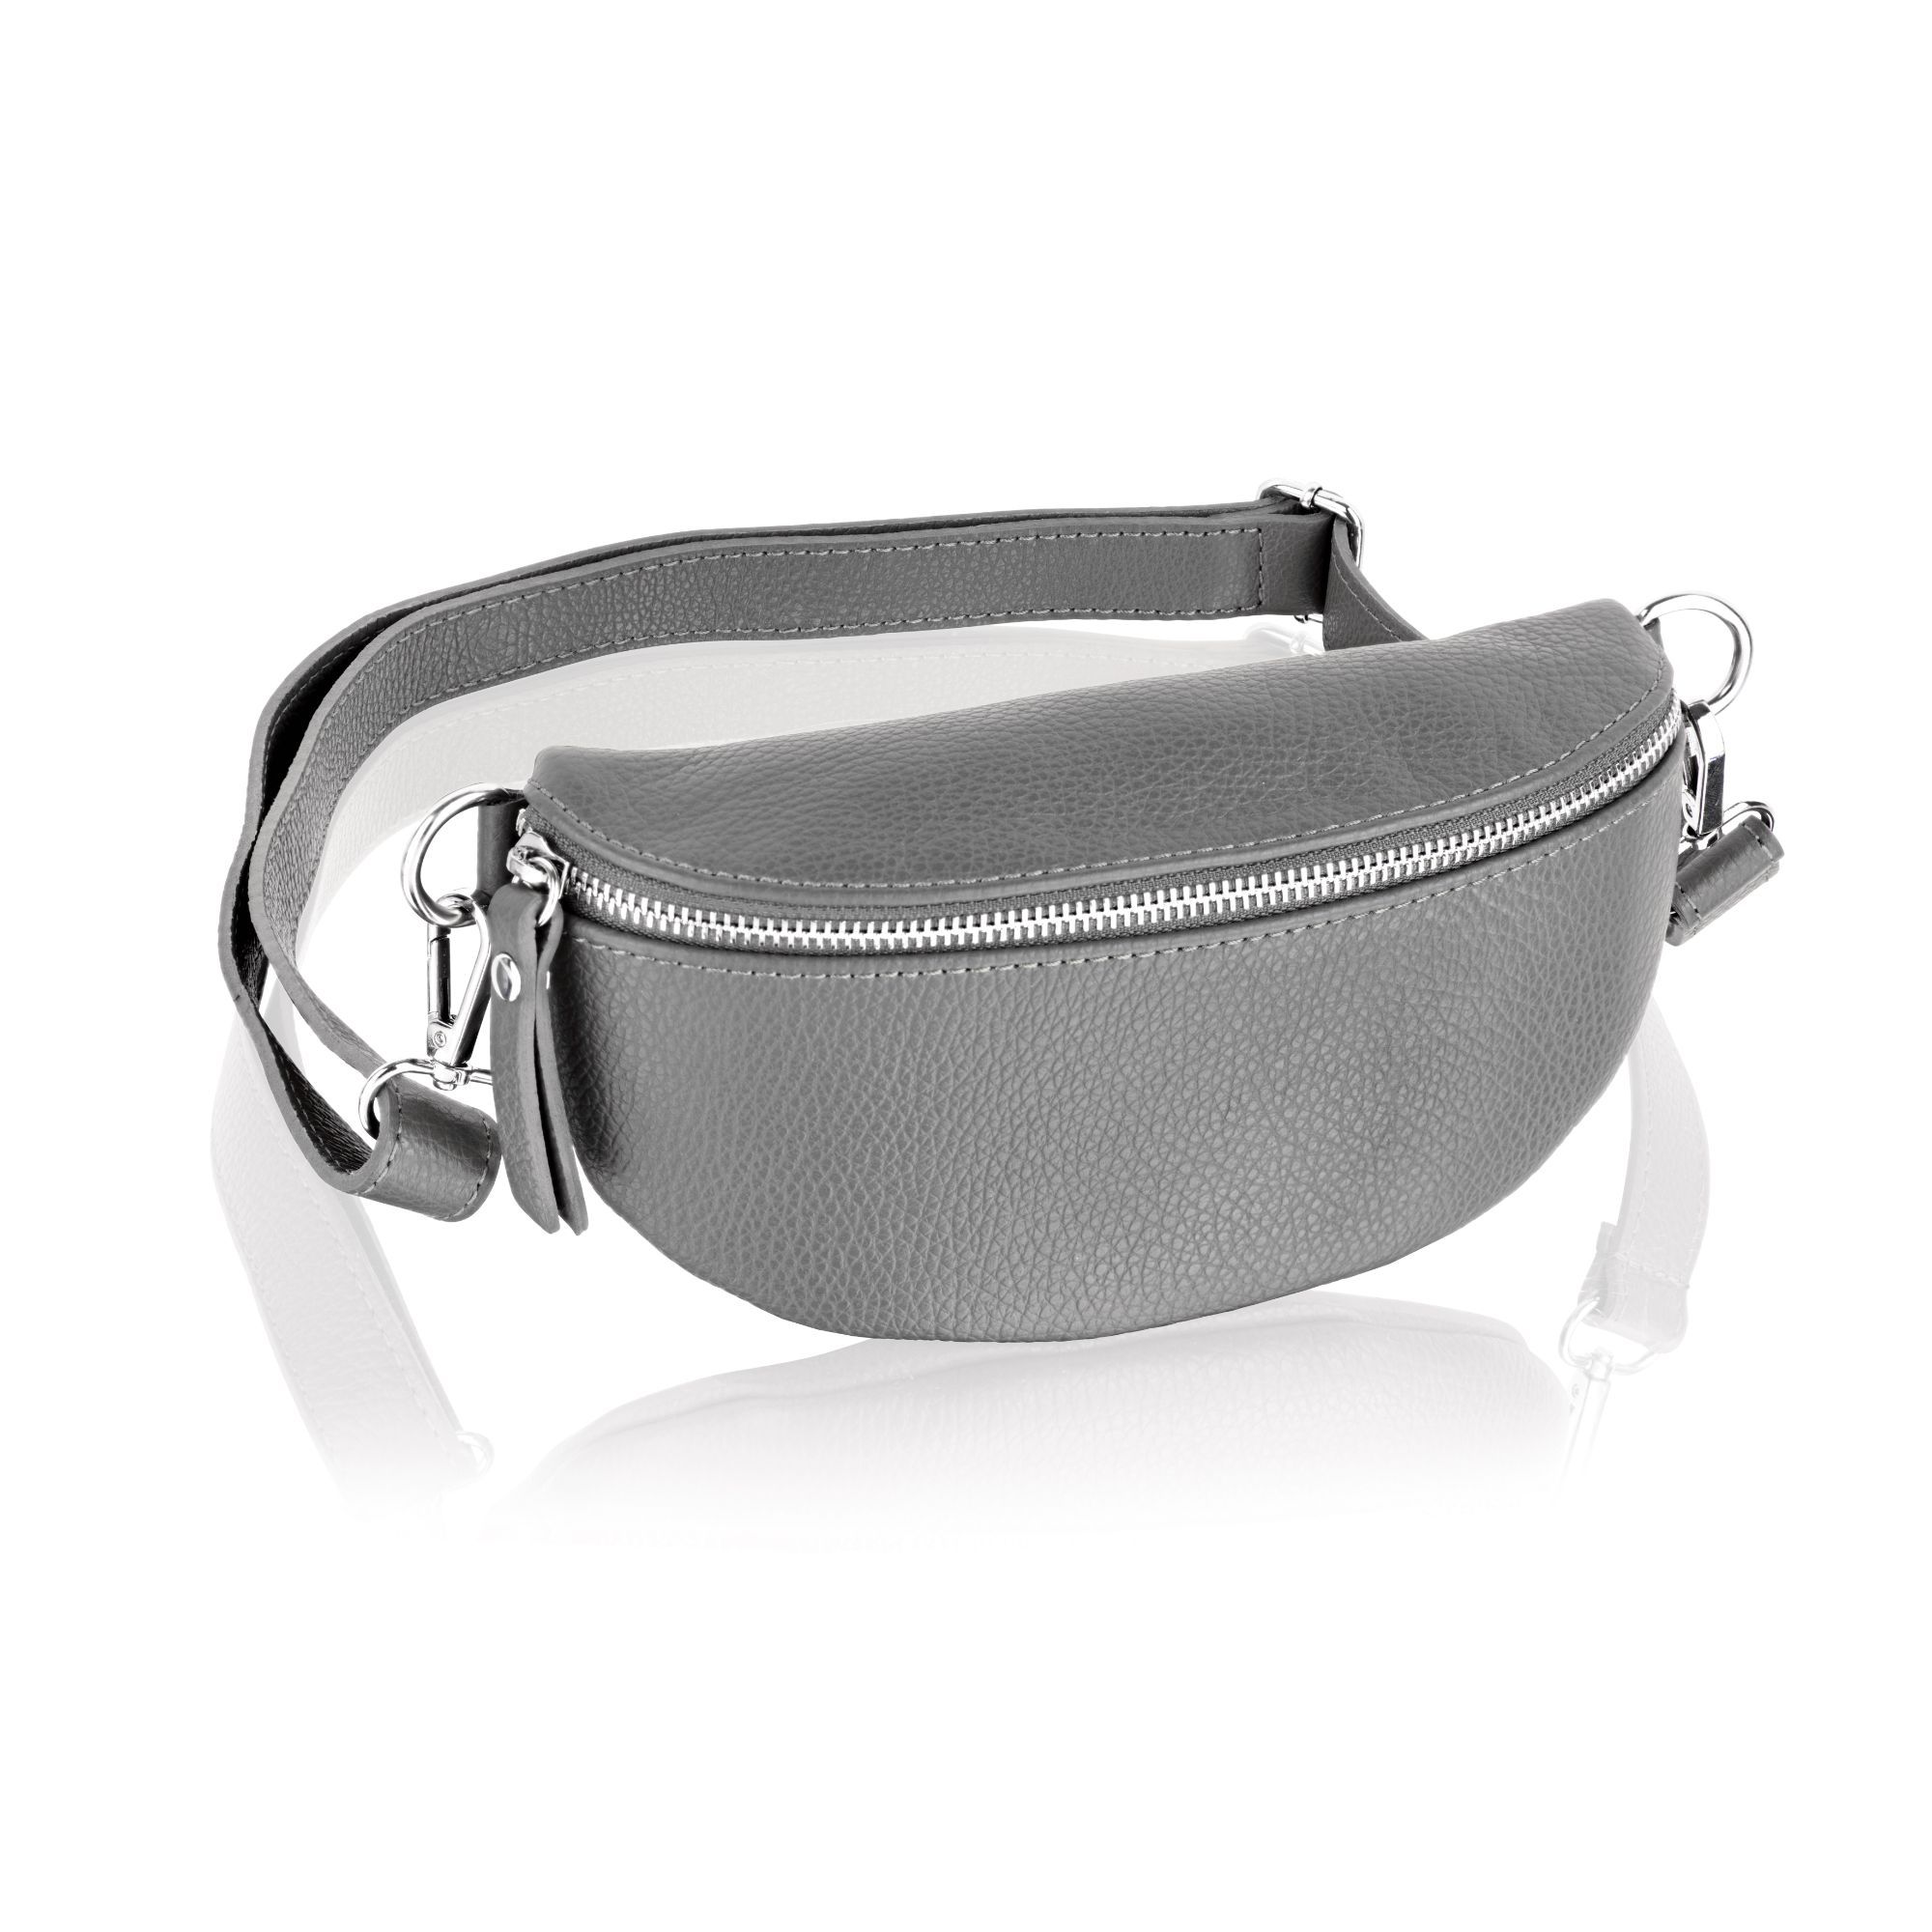 MADE IN ITALY - This is a small but stylish genuine leather waist bag and is very simplistic in design and look. The bag is accessed via a metal silver zip and once inside there are 2 sections: one to accommodate cards and cash and the other one is to put the other necessities. There are 2 closed silver buckles on either side of the bag which can attach to an adjustable strap with key ring style hooks on either side of the shoulder strap. The leather is smooth and of high quality being made in Italy.